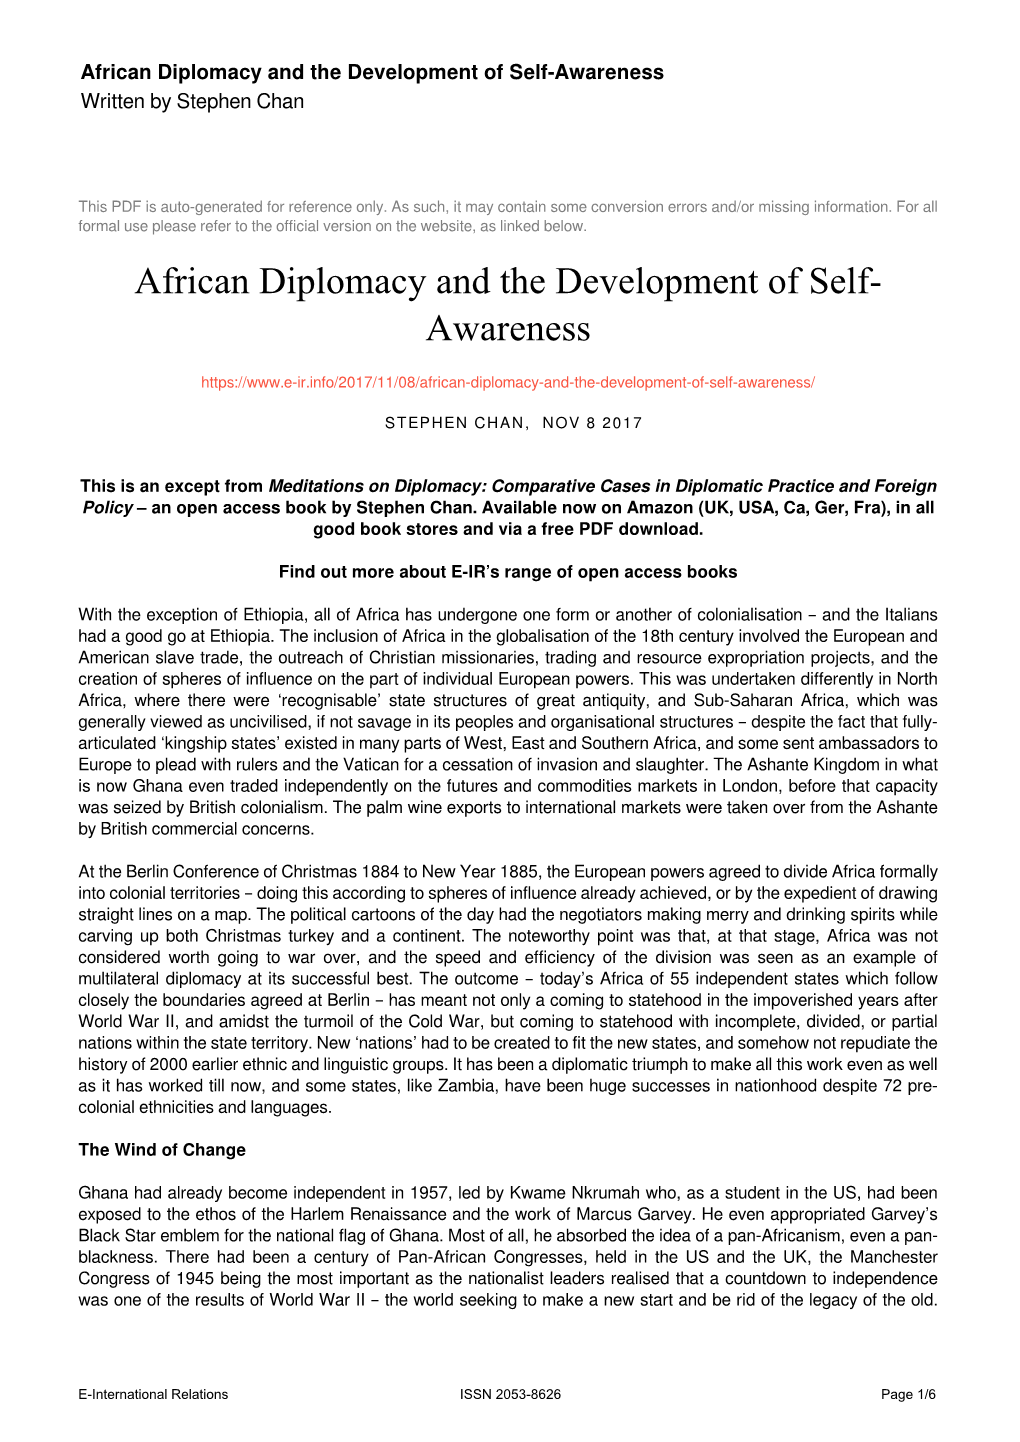 African Diplomacy and the Development of Self-Awareness Written by Stephen Chan